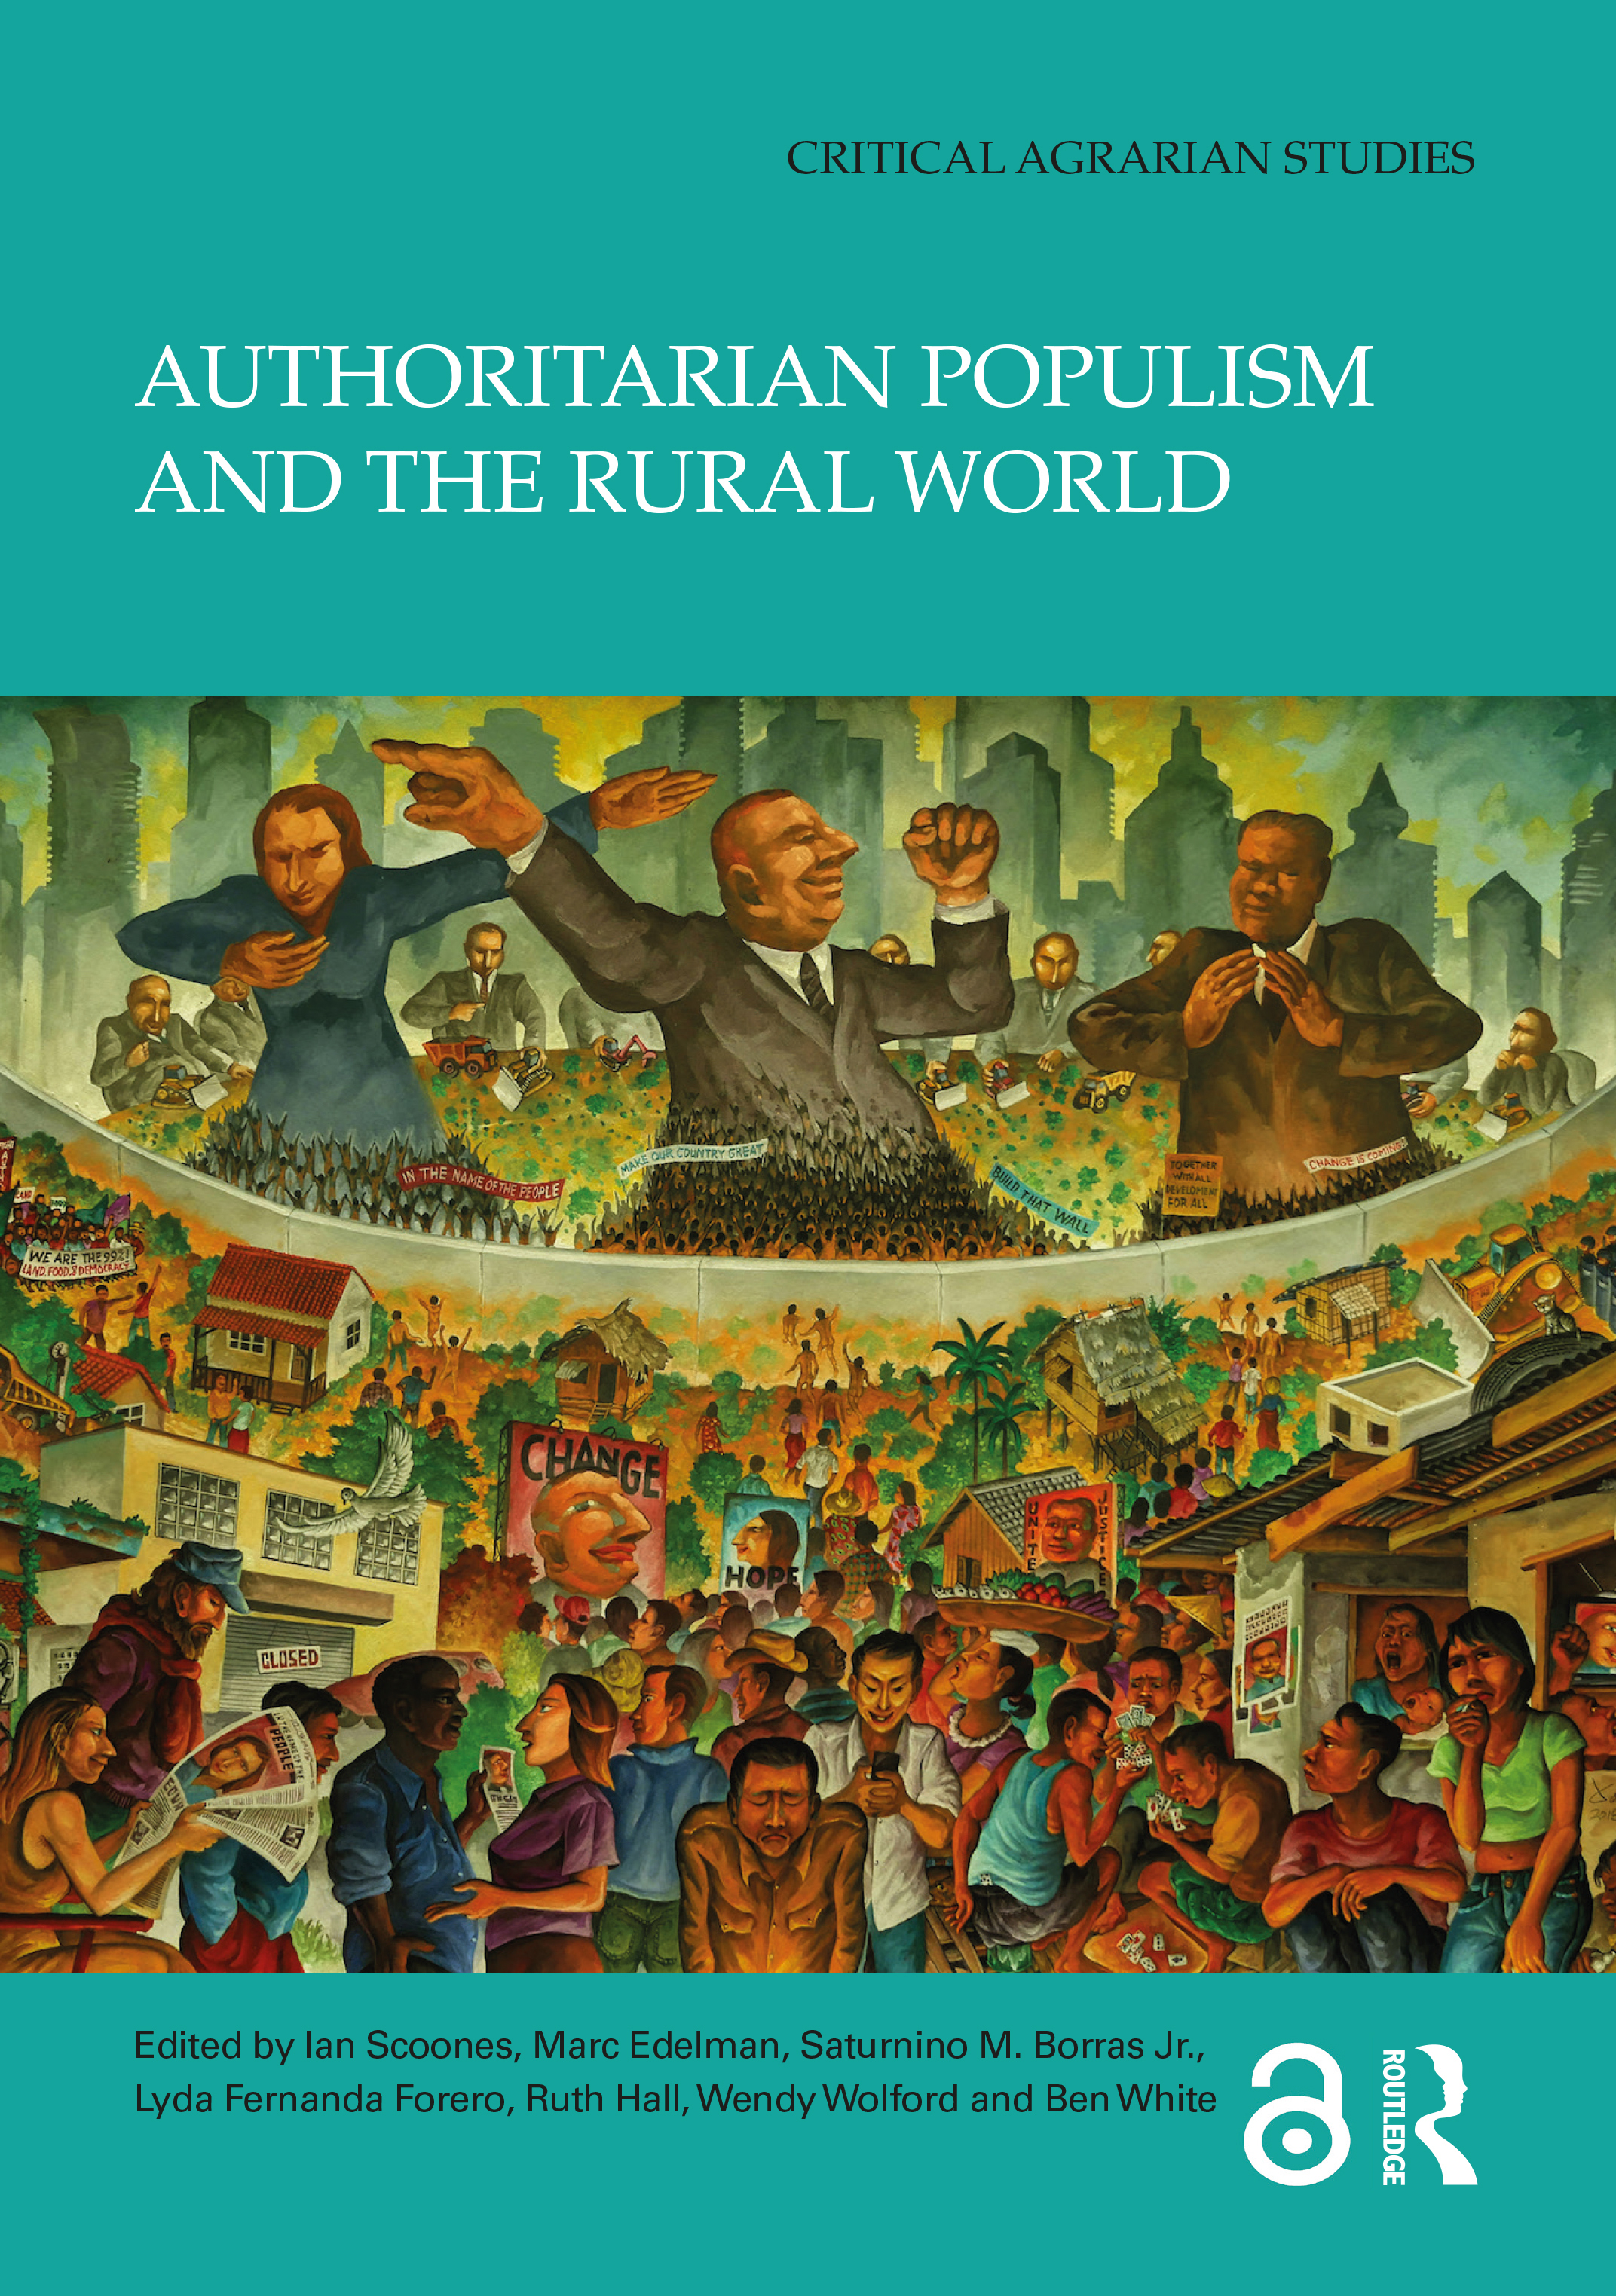 Authoritarian Populism and the Rural World (Edited by Ian Scoones, Marc Edelman, Saturnino M. Borras Jr., Lyda Fernanda Forero, Ruth Hall, Wendy Wolford and Ben White) Promo Image